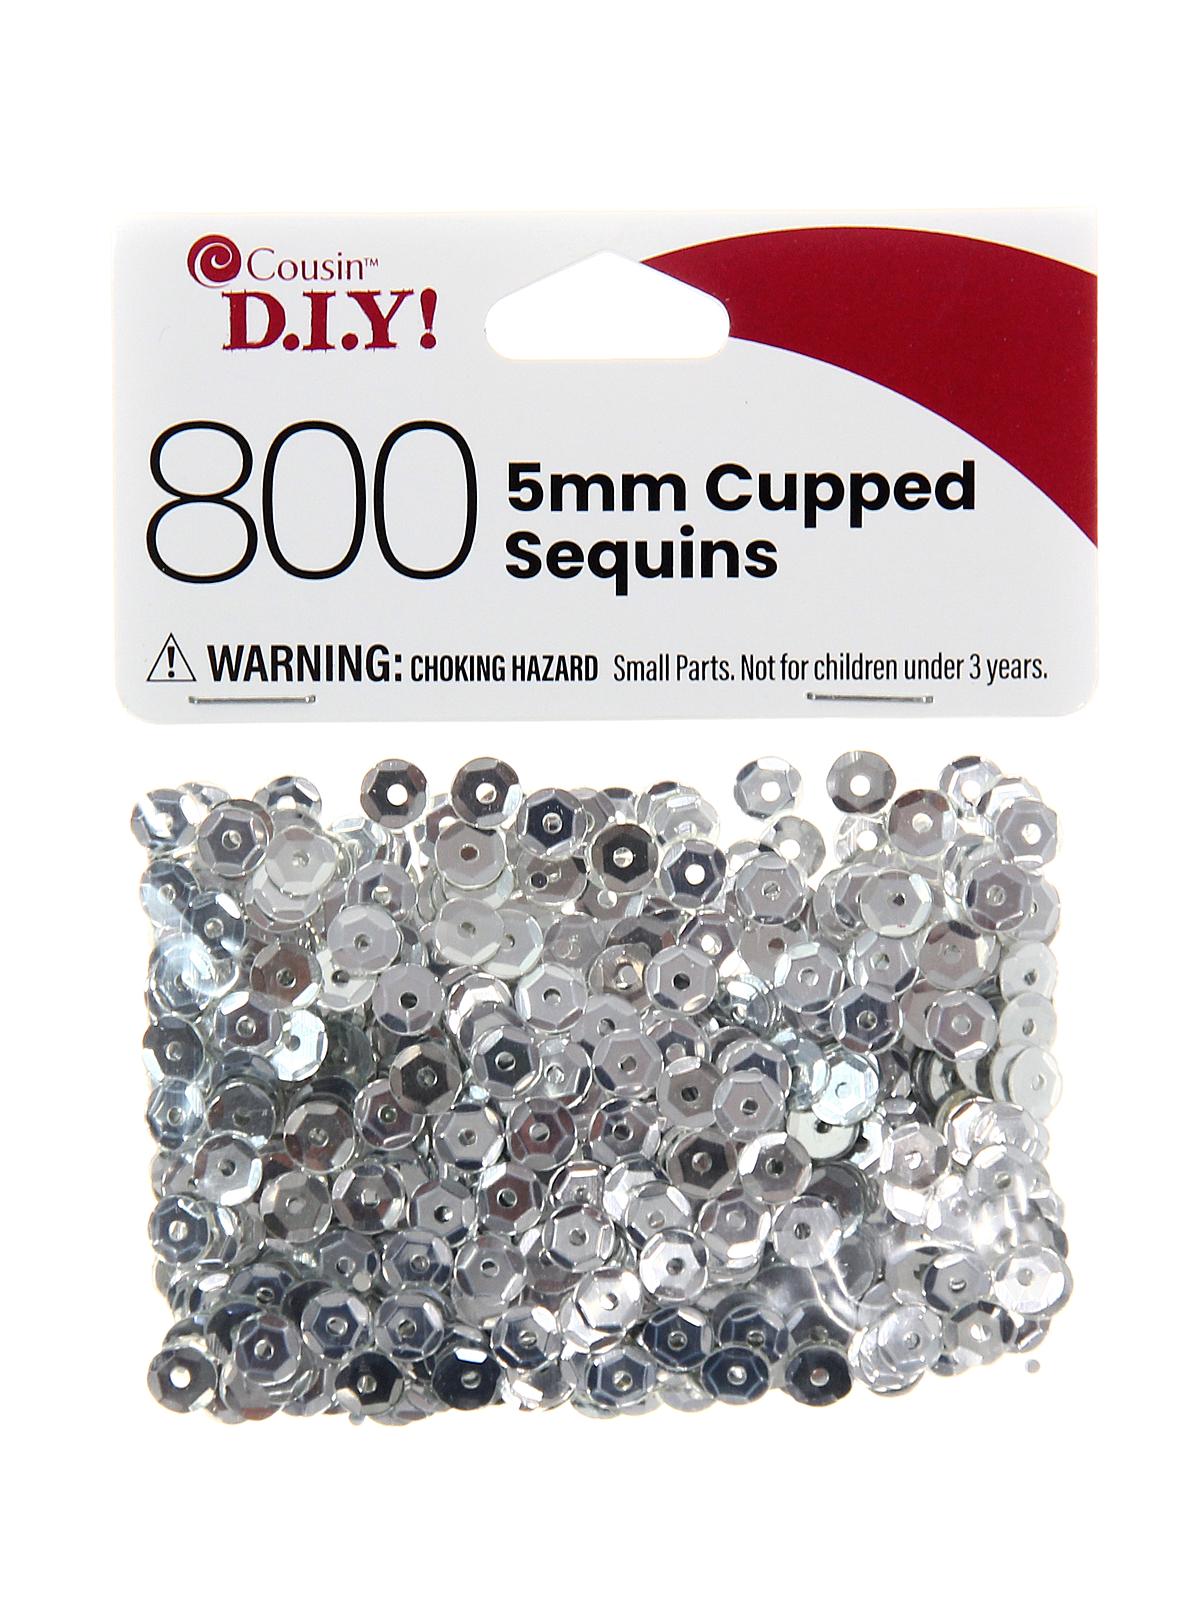 Cupped Sequins Silver 5 Mm Pack Of 800